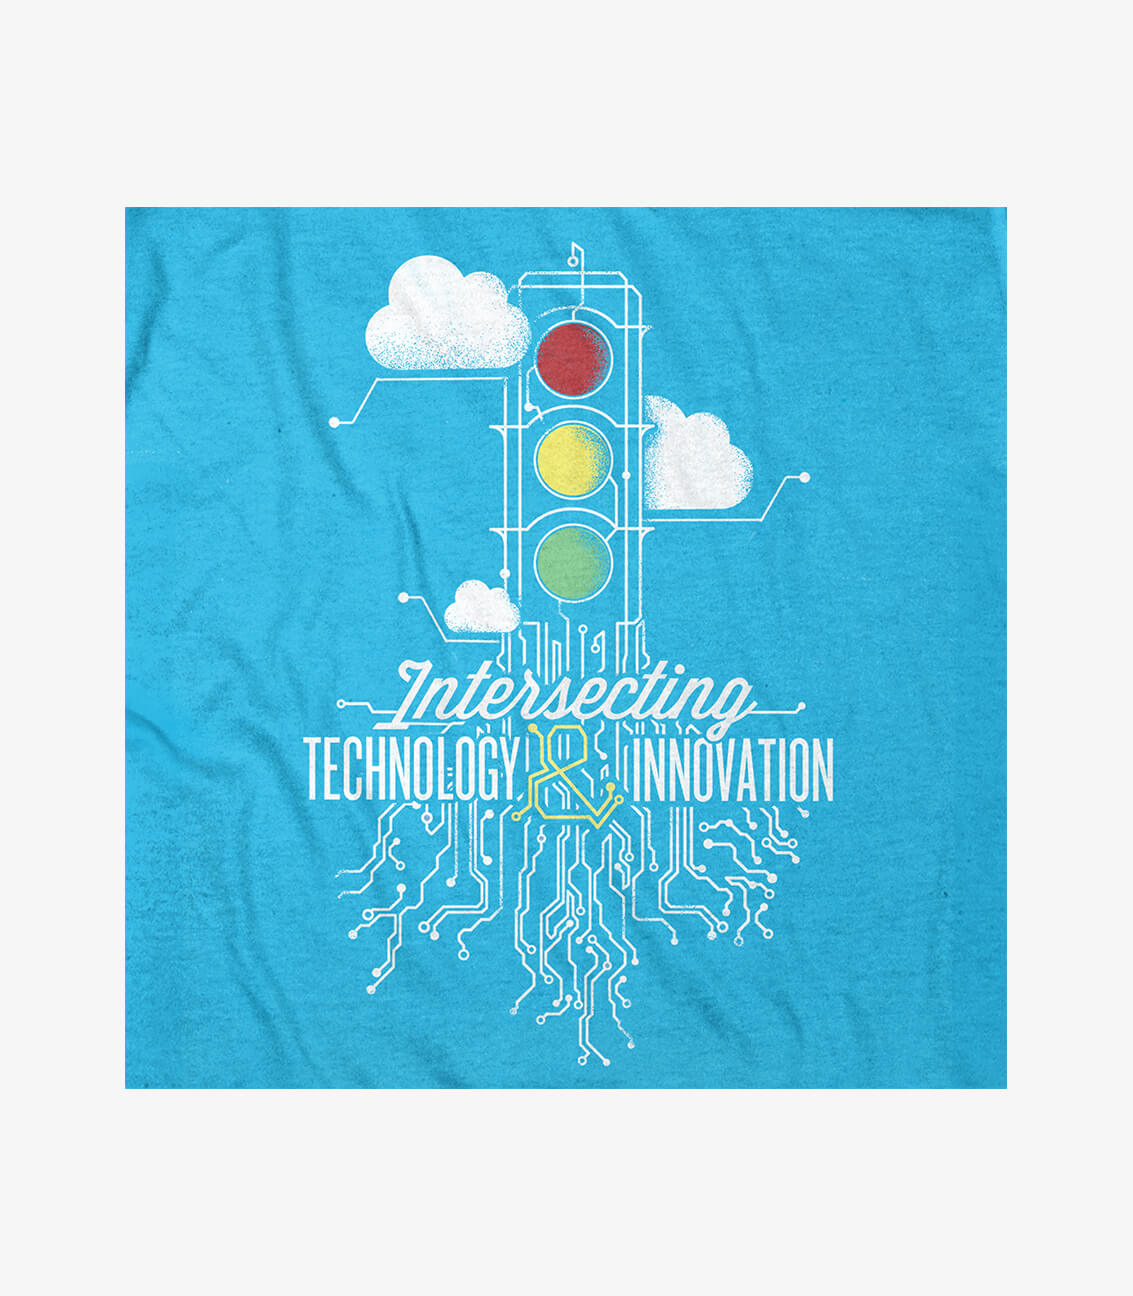 Intersecting lights graphic shirt art design for Salesforce Computing in San Francisco, California